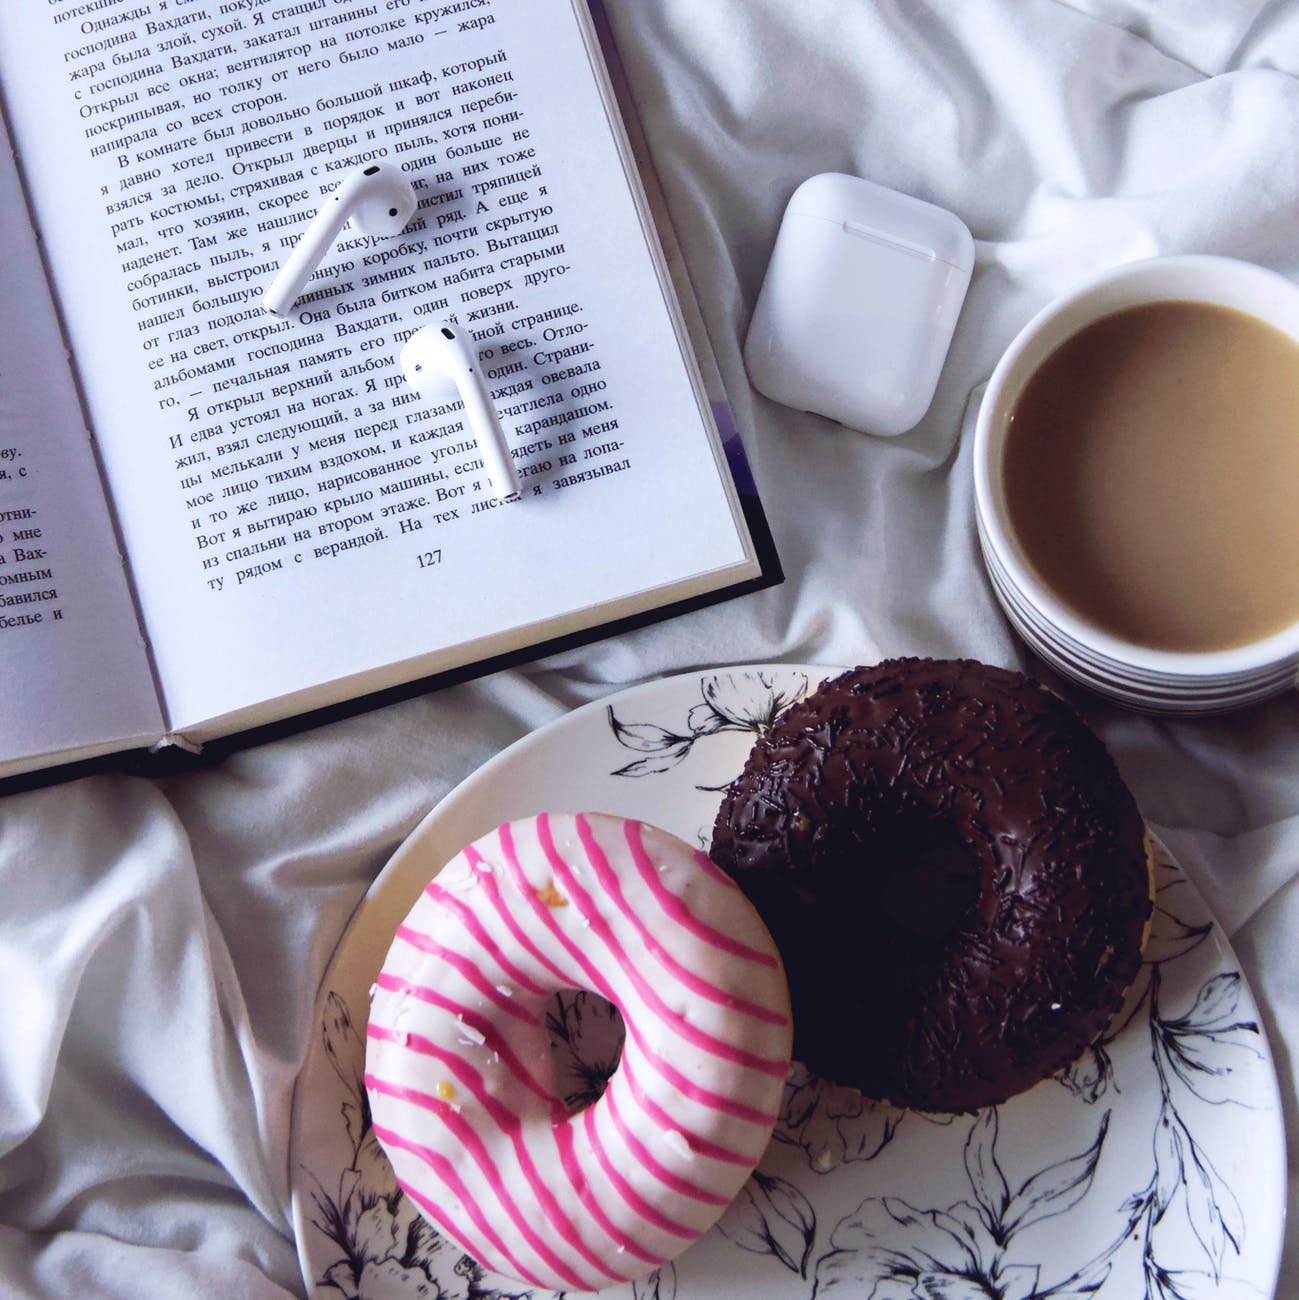 cup of coffee with doughnuts placed near opened book